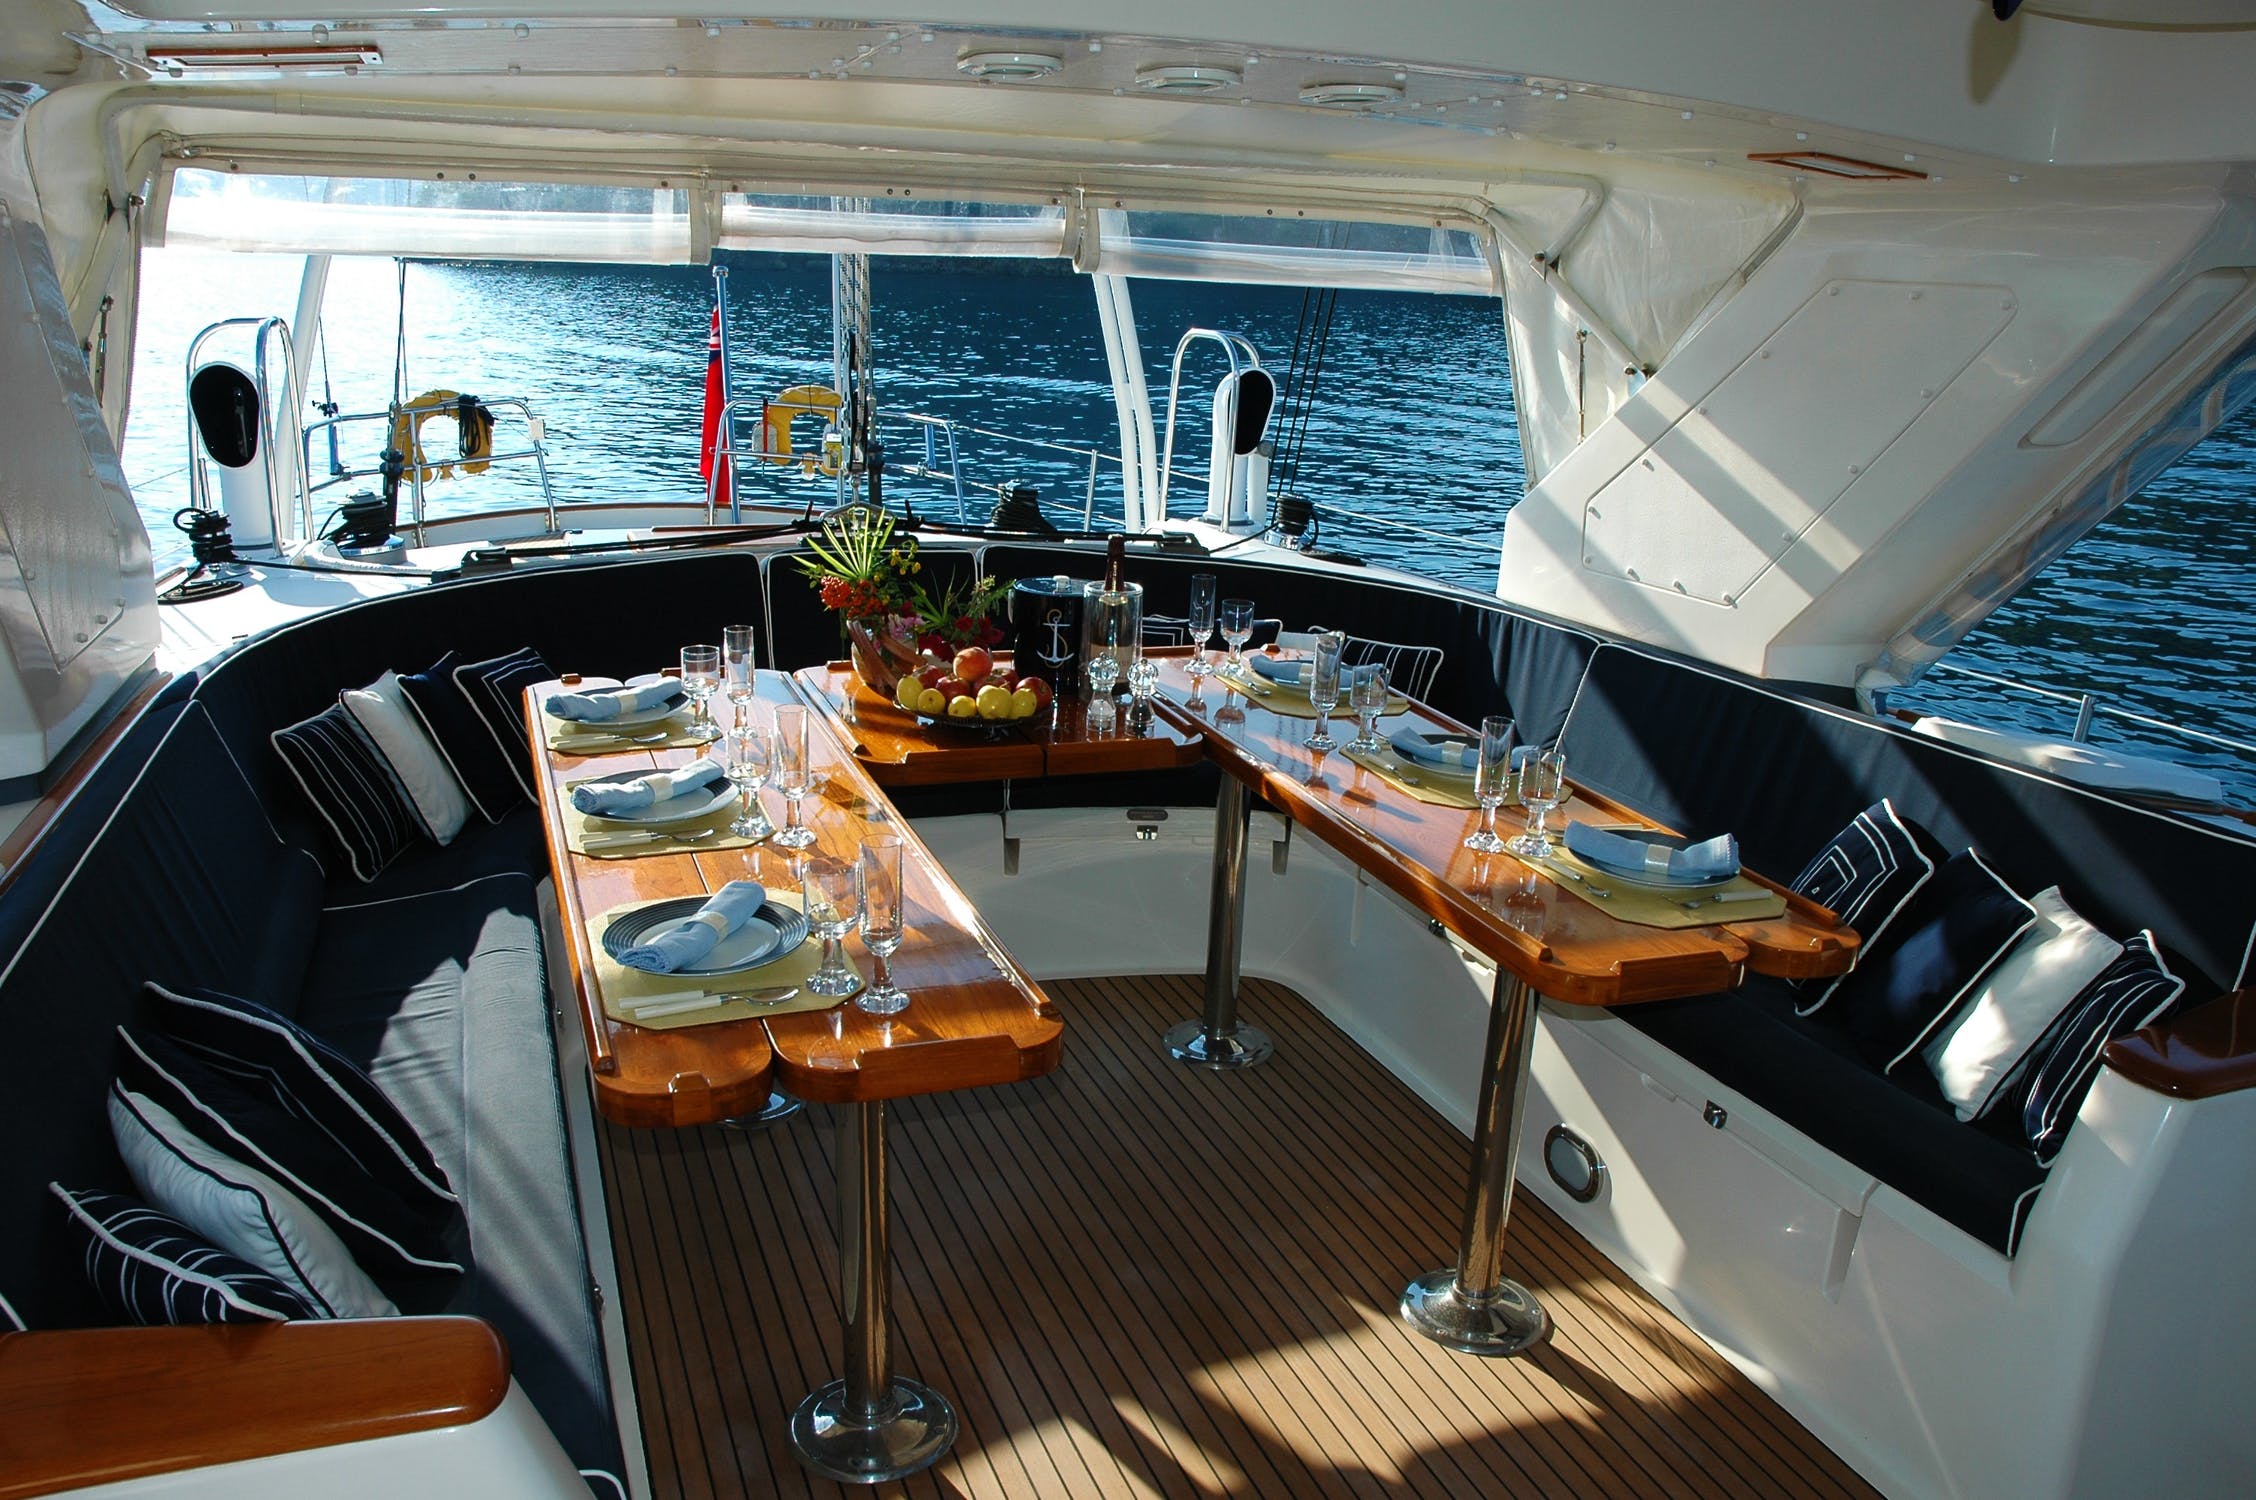 The interior of a superyacht with the table laid for a meal